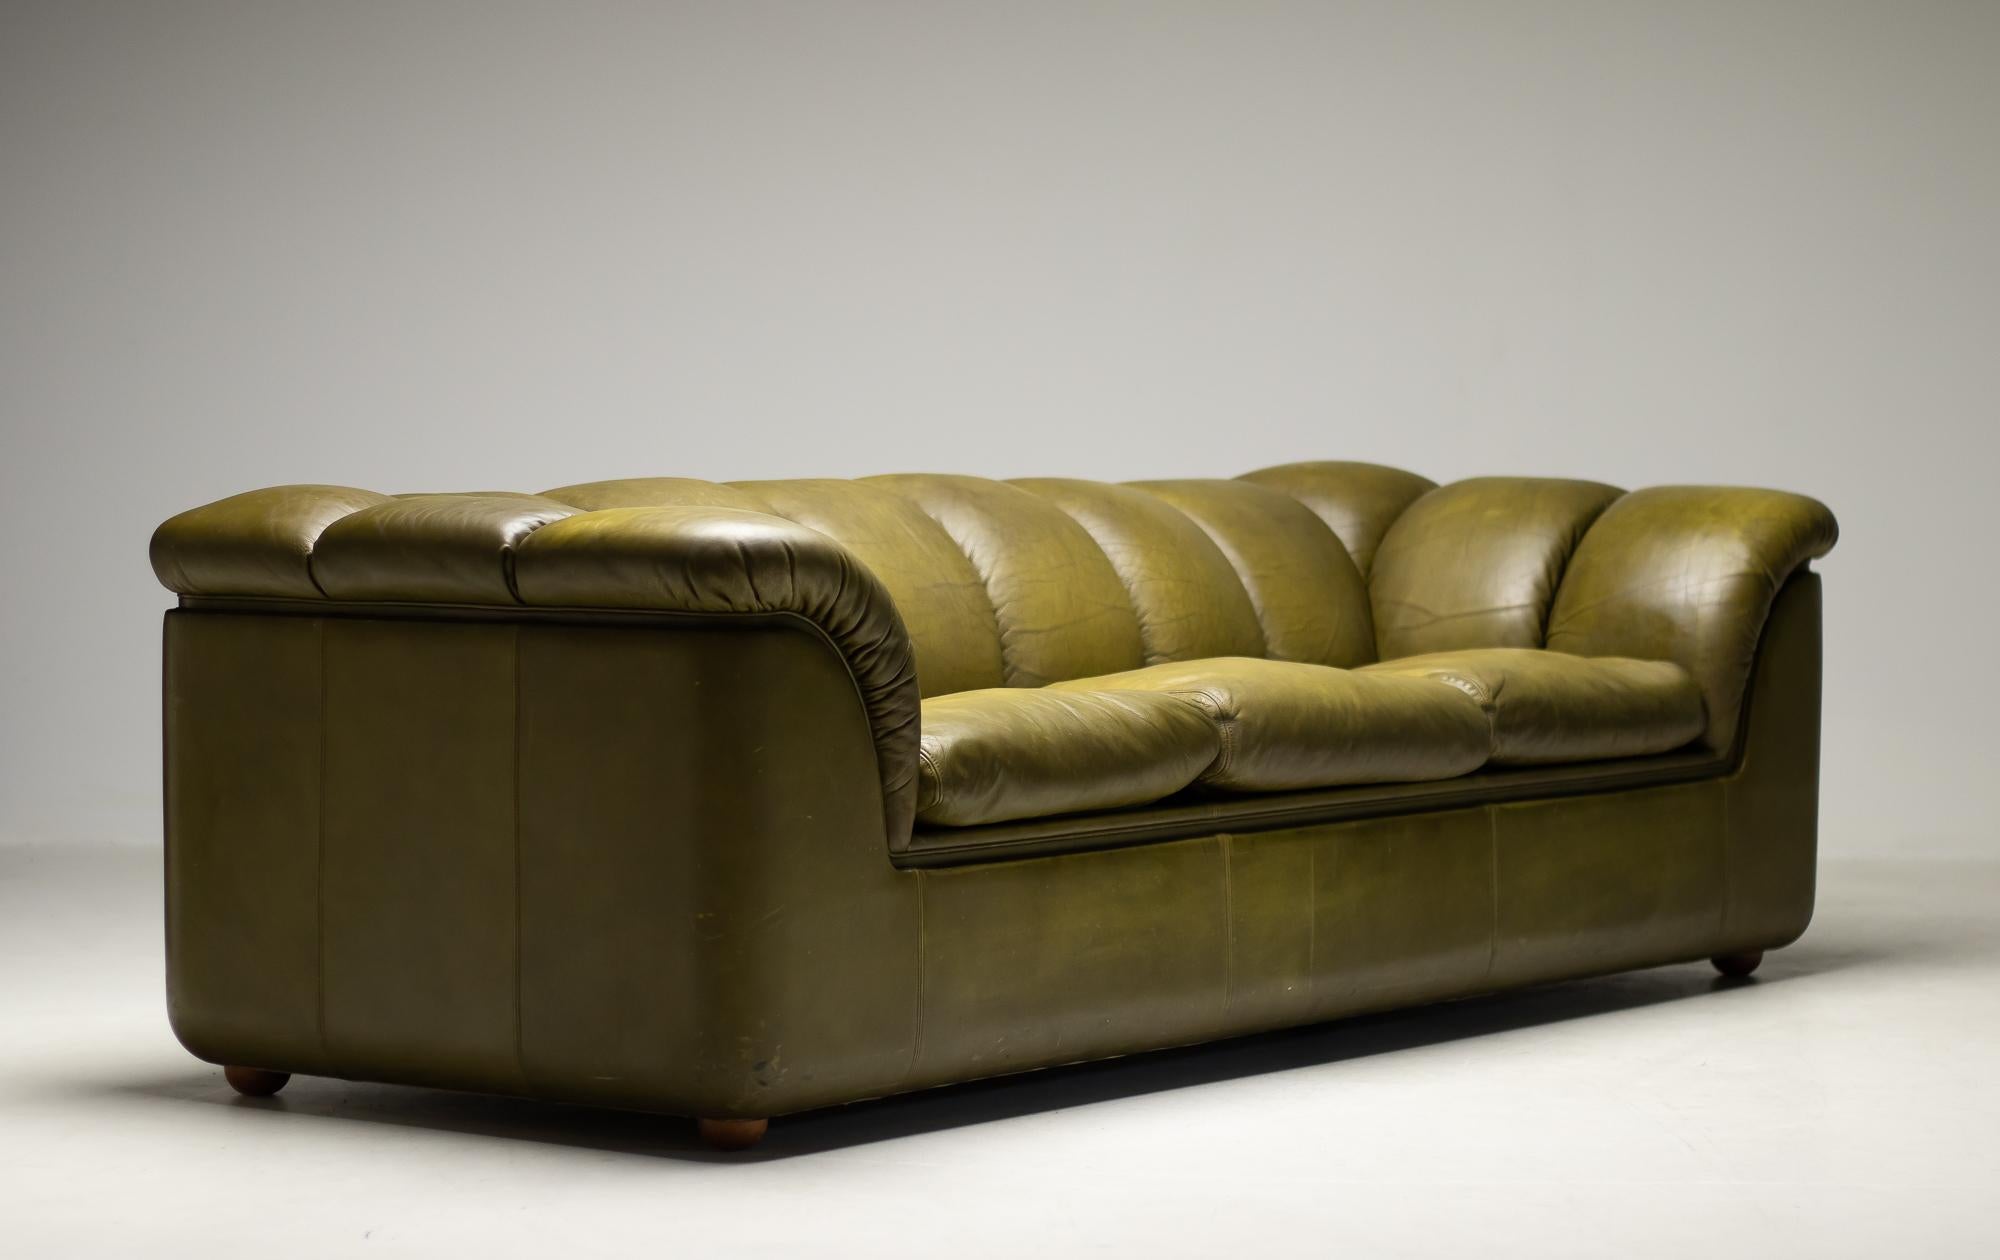 Distinctive Poltrona Frau Cocker sofa from the premium collection in the late 1970s. (source: Poltrona Frau, Italy)
This long and low down-filled 3-seat is designed by Franco Bresciani.
The supple leather has acquired the right amount of patina to